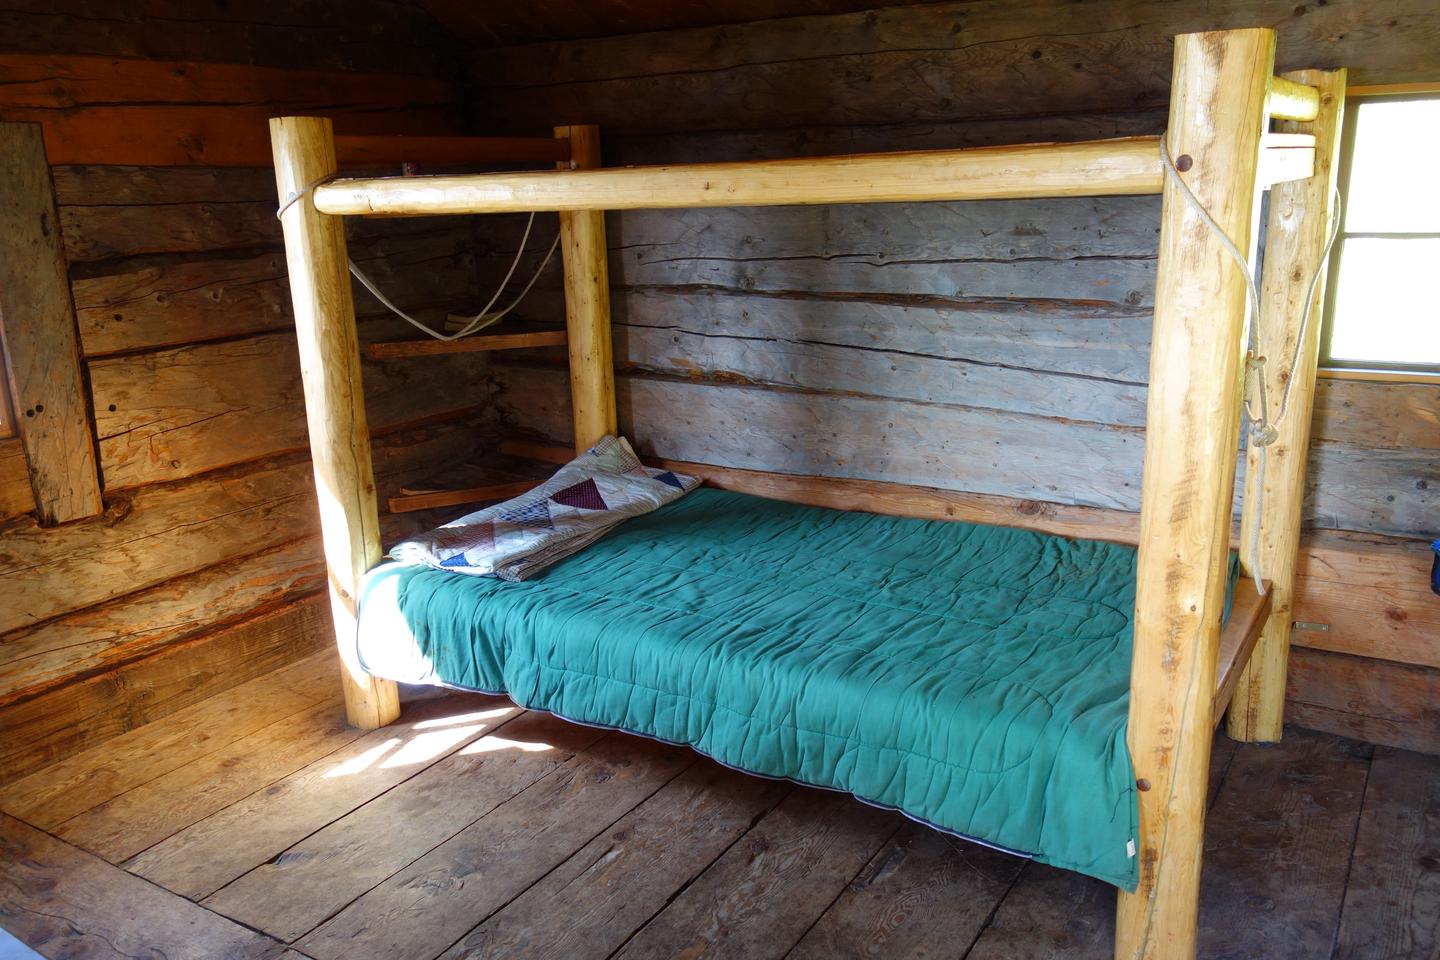 A simple wooden bed frame with blankets in a wood cabin.Two sleeping platforms in Fure's Cabin.